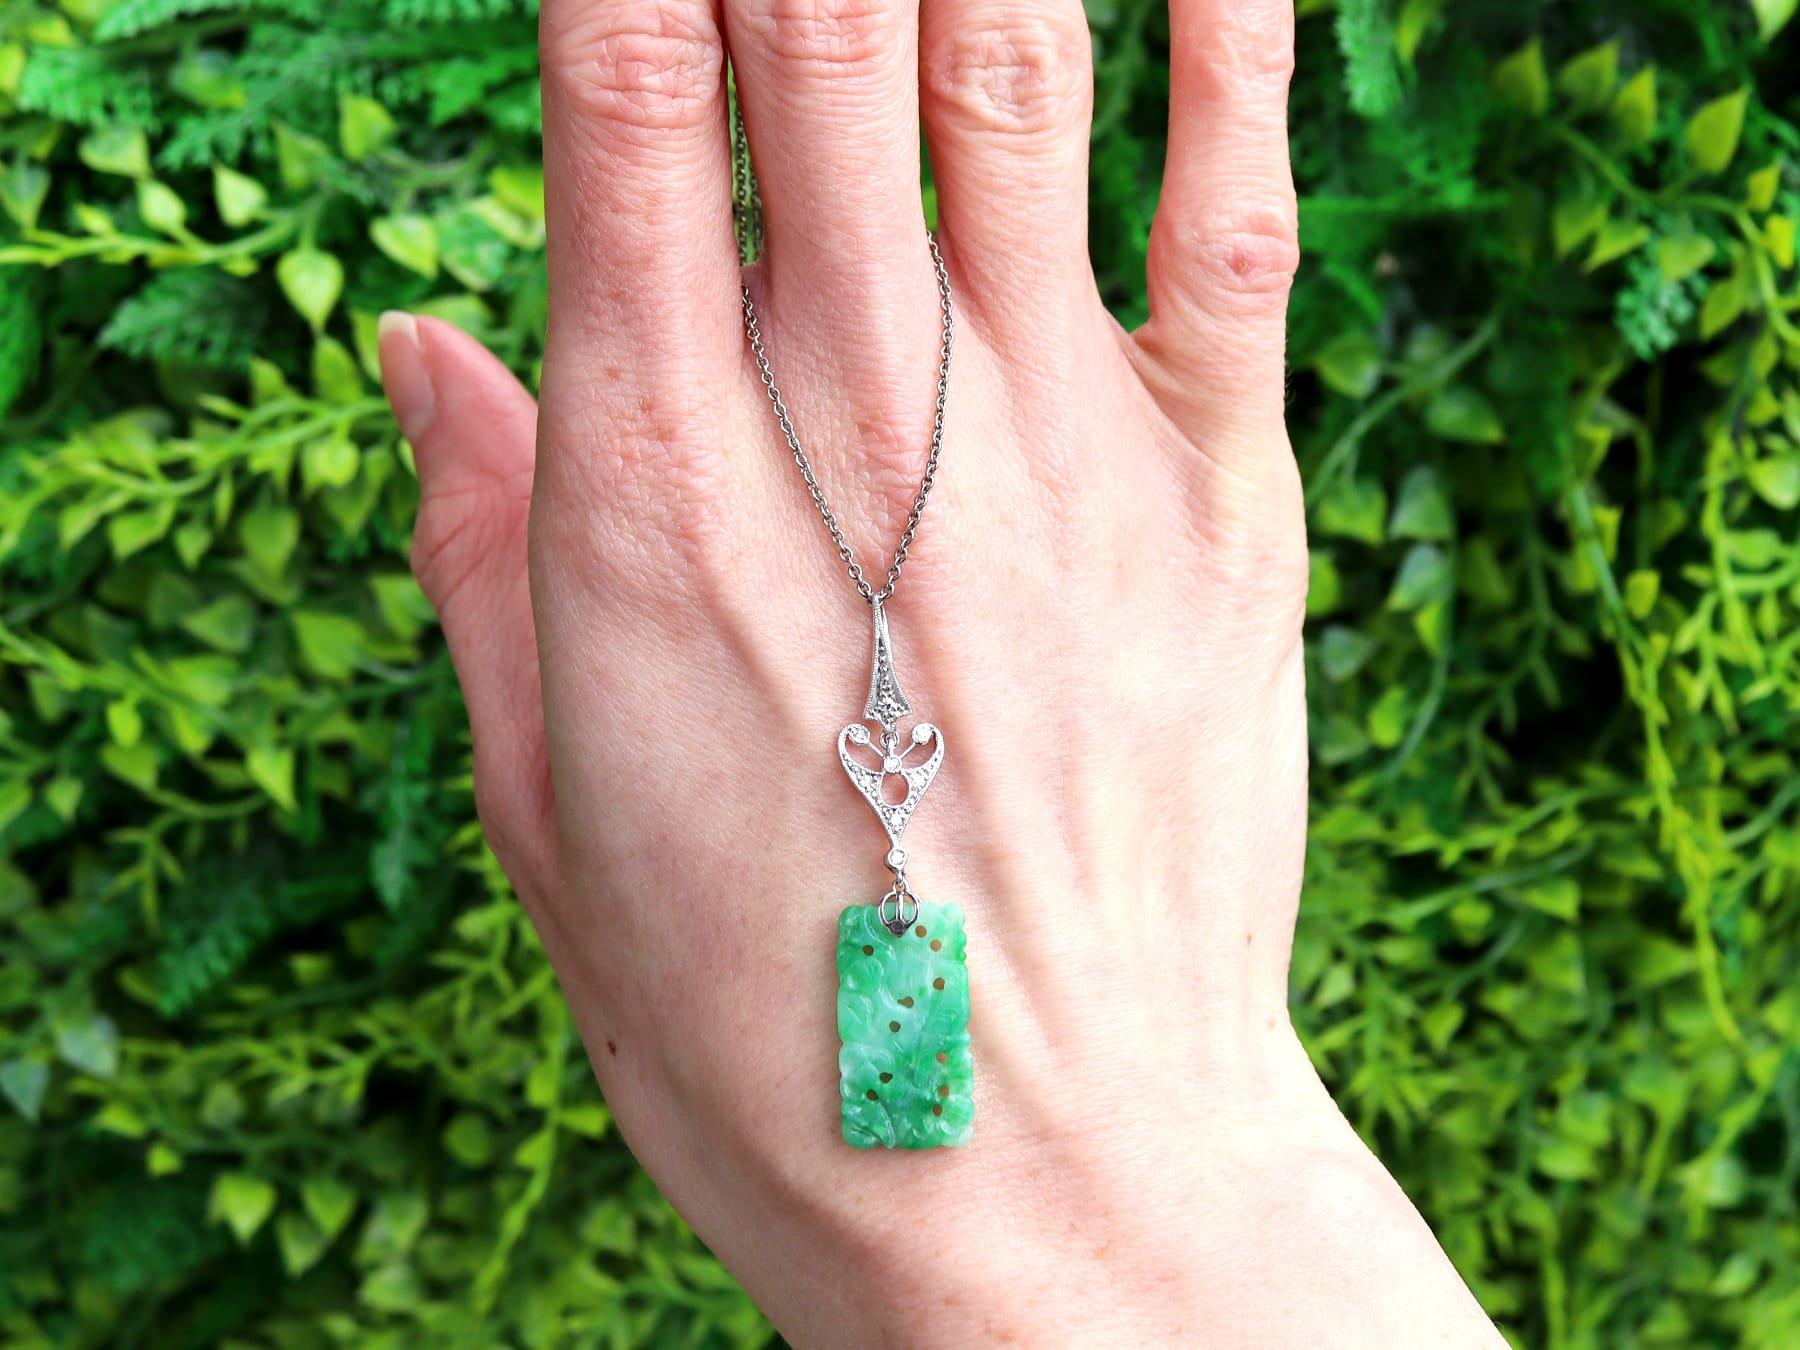 A fine and impressive antique 1920's 4.60 carat jadeite and 0.28 carat diamond, 18k white gold and platinum set pendant; part of our diverse antique jade jewellery collections.

This fine and impressive antique pendant has been crafted in 18k white